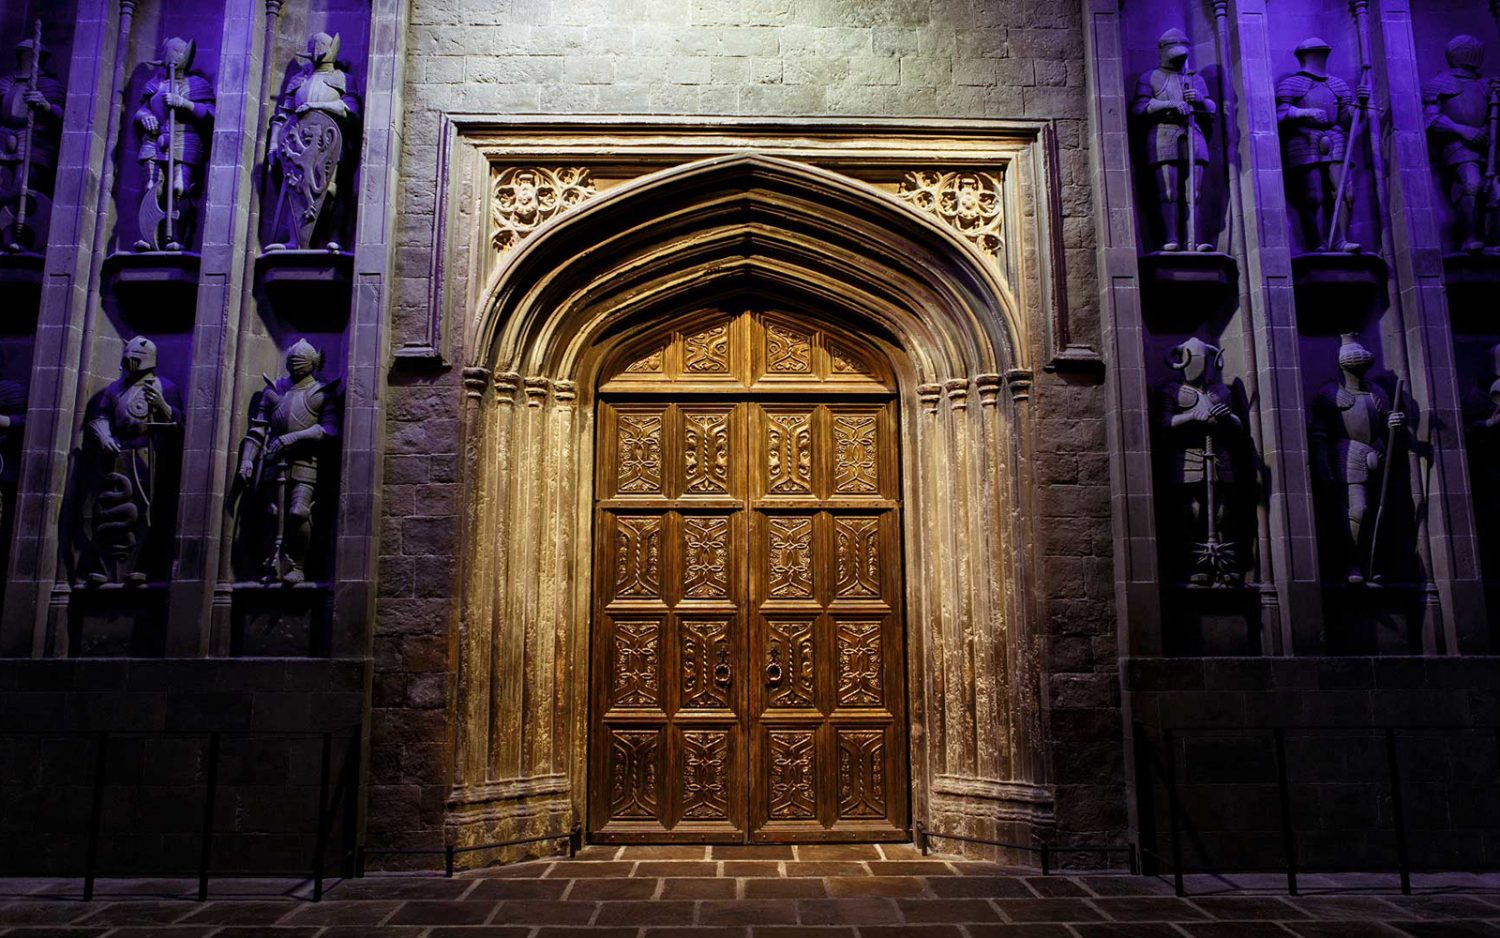 Harry Potter Studio Tickets - Only £94.00 - Tickets.co.uk